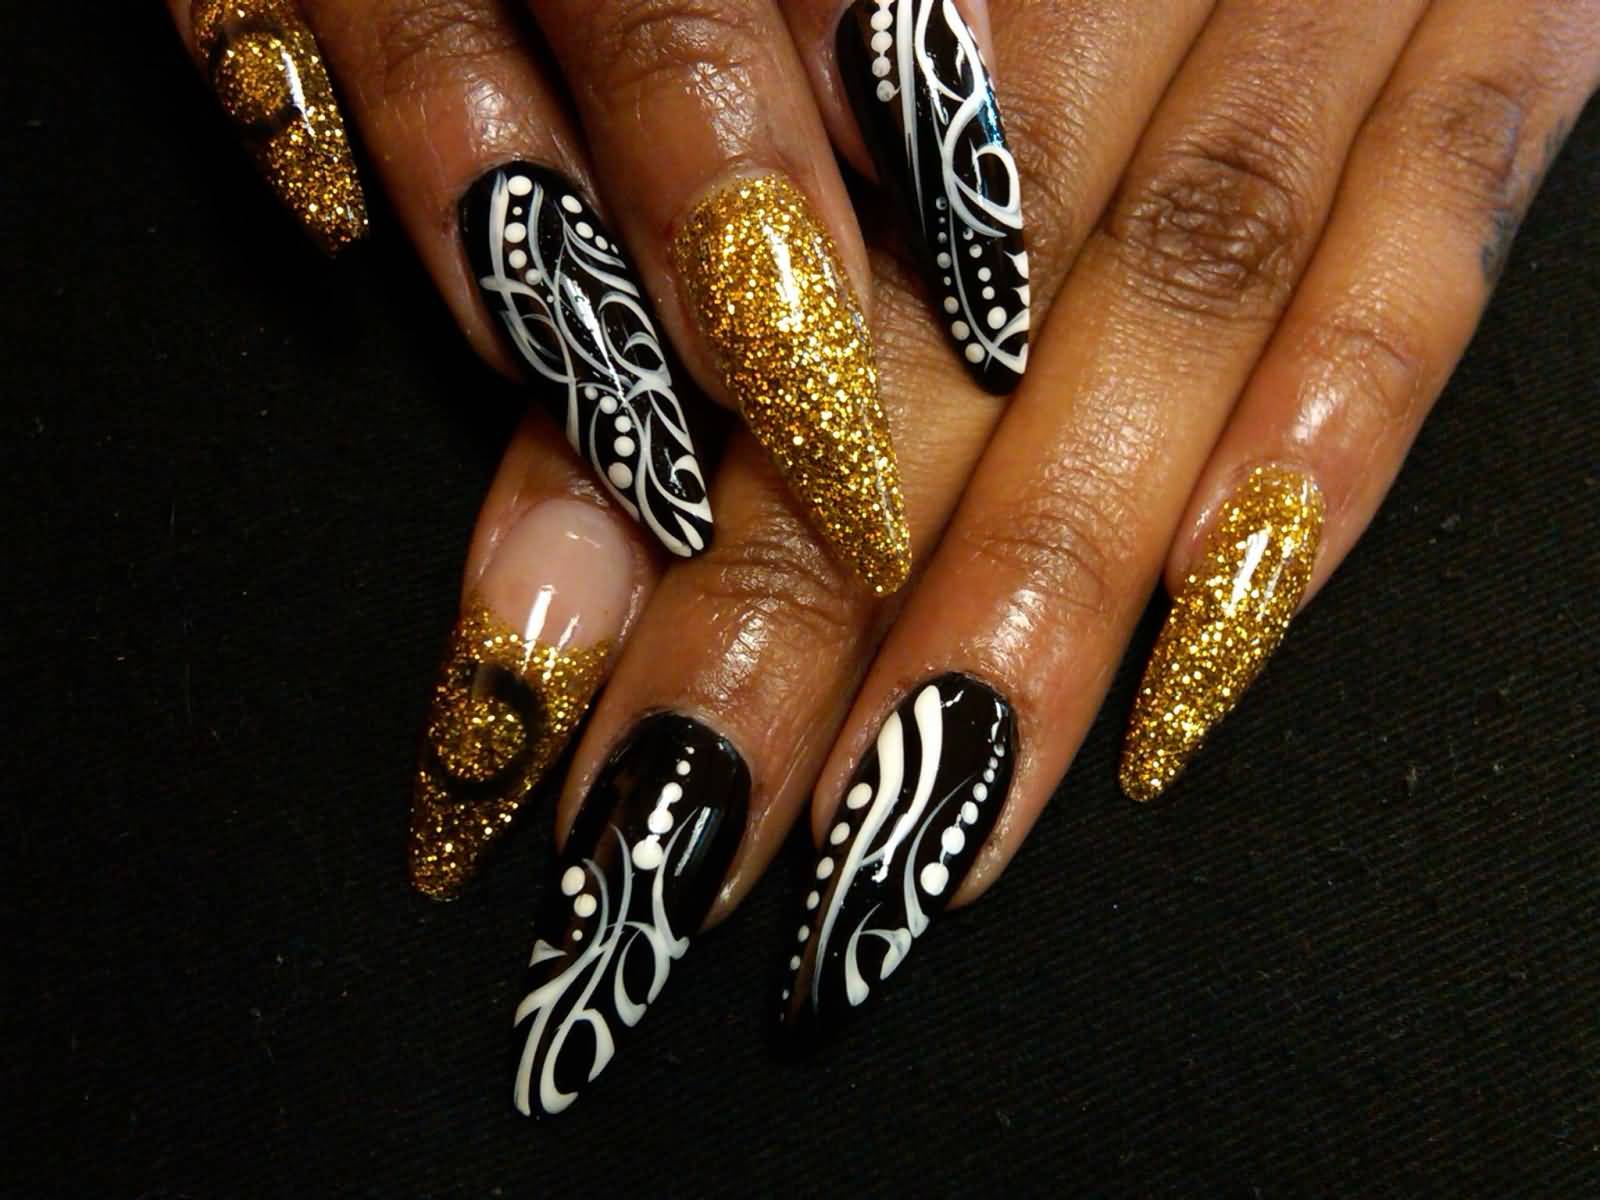 3. "10 Adorable Stiletto Nail Designs for Every Occasion" - wide 2